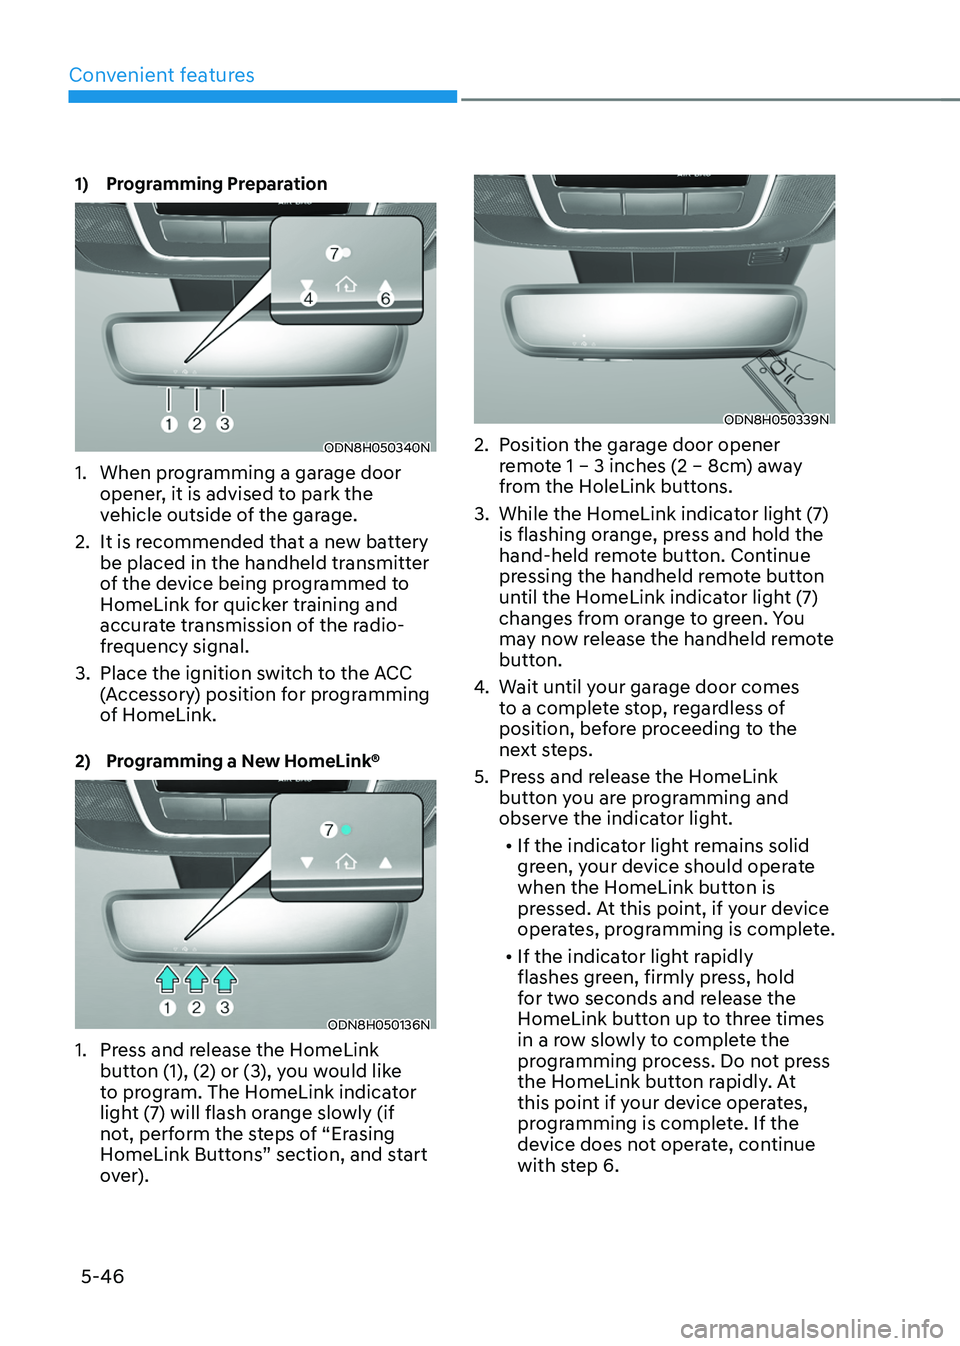 HYUNDAI TUCSON 2022  Owners Manual Convenient features
5-46
1) Programming Preparation
ODN8H050340N
1. When programming a garage door 
opener, it is advised to park the 
vehicle outside of the garage.
2. It is recommended that a new ba